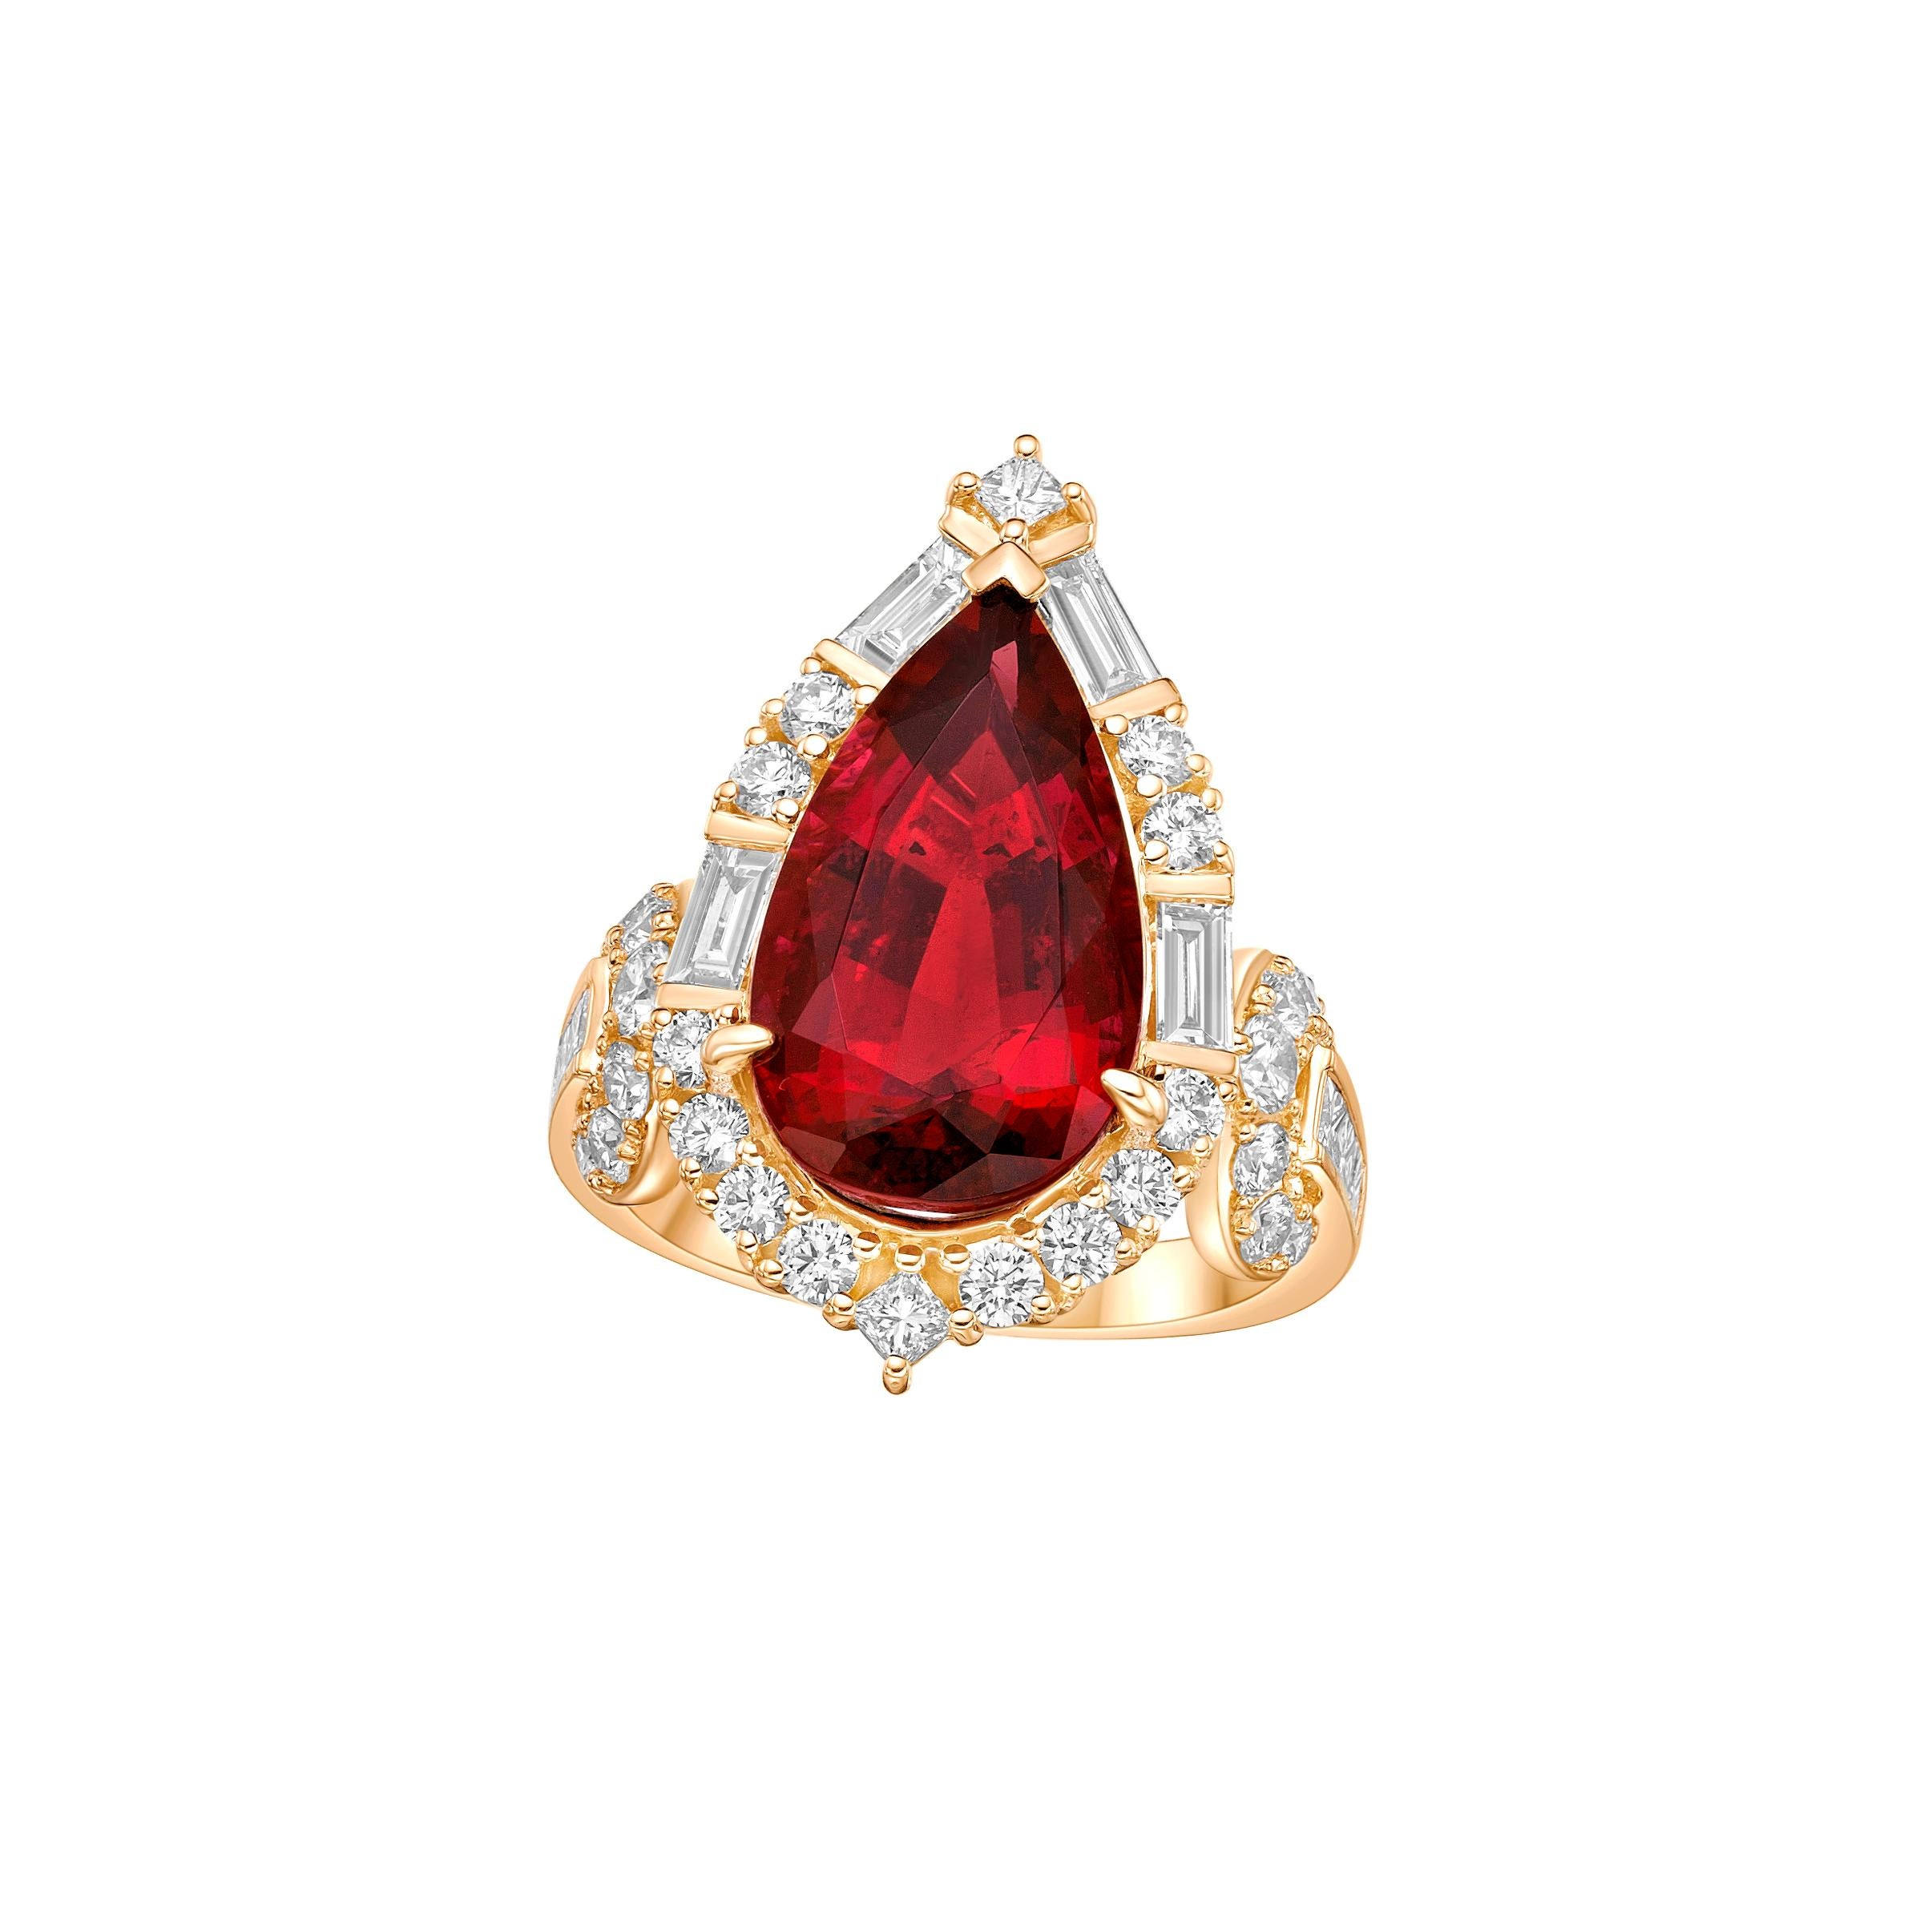 Pear Cut 6.796 Carat Rubelite Fancy Ring in 18Karat Yellow Gold with White Diamond. For Sale